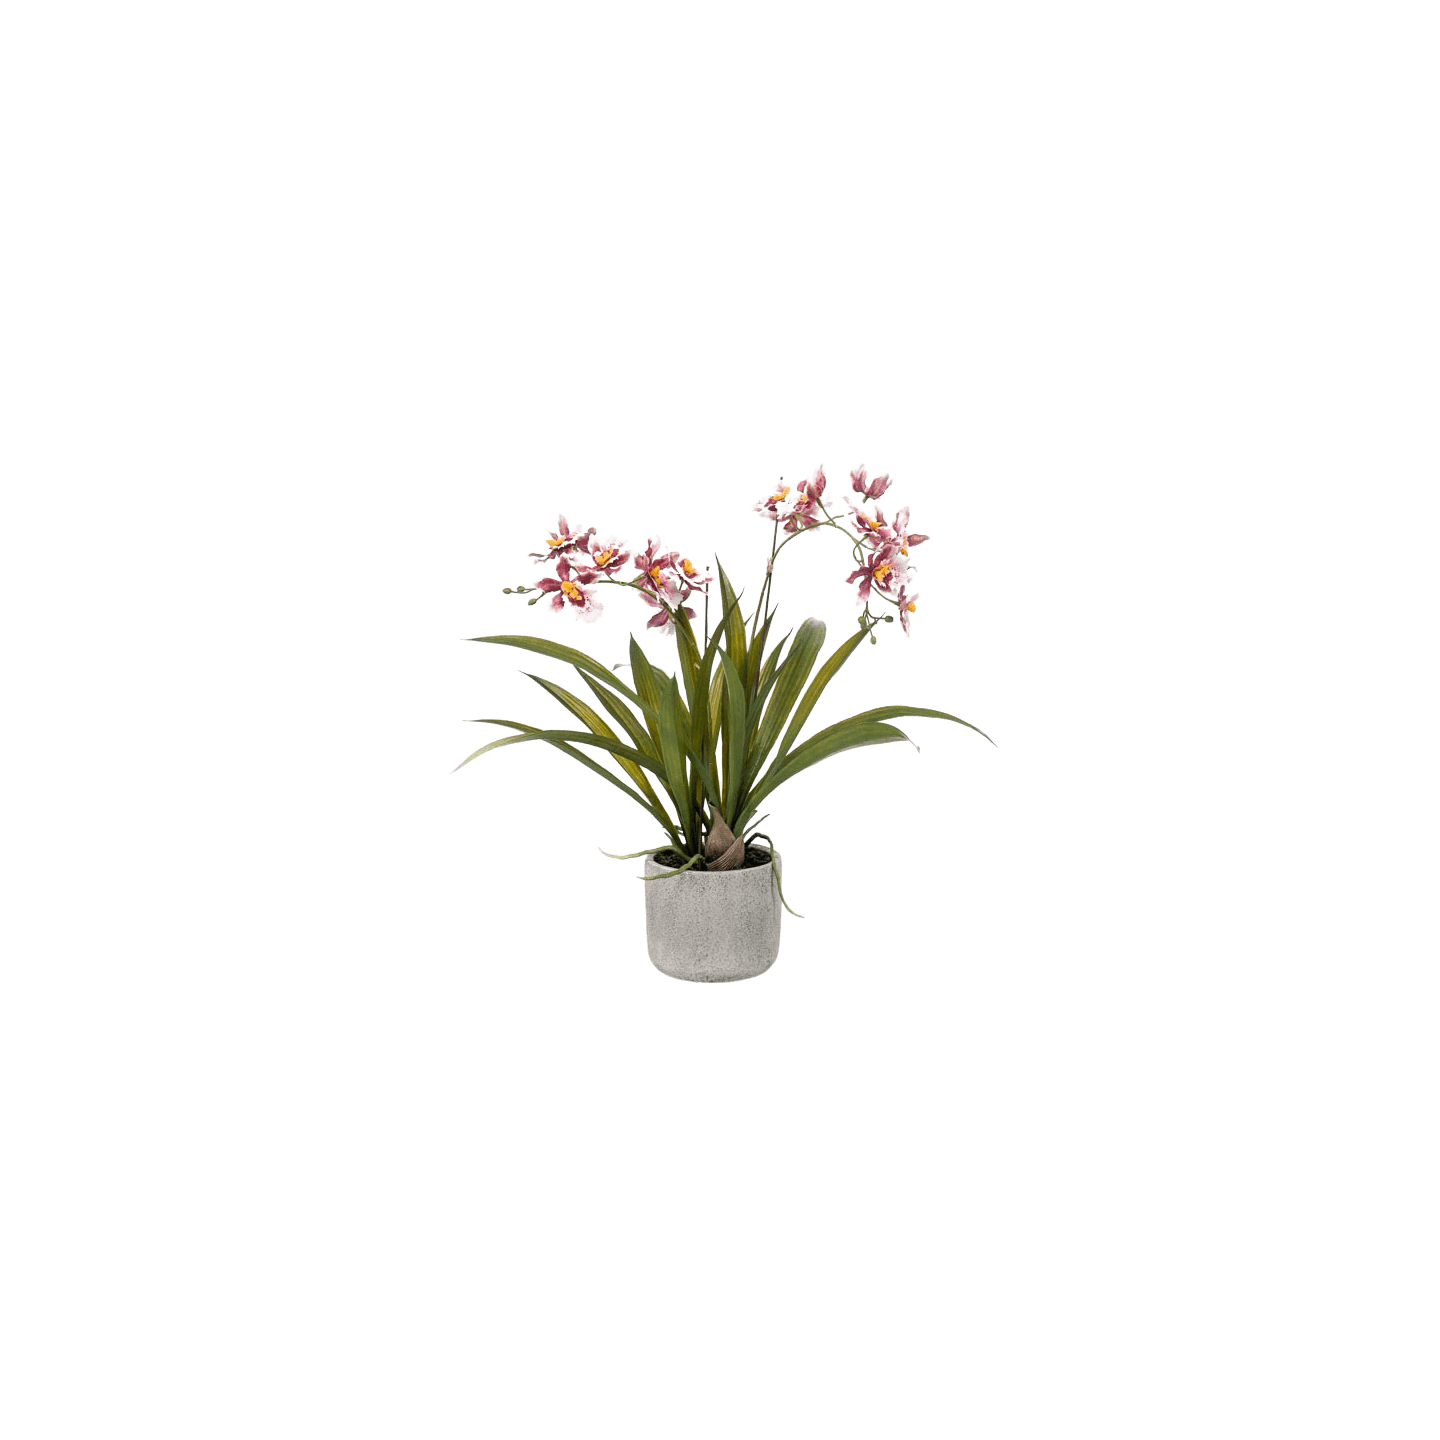 Artificial orchid flower in decorative grey cement pot